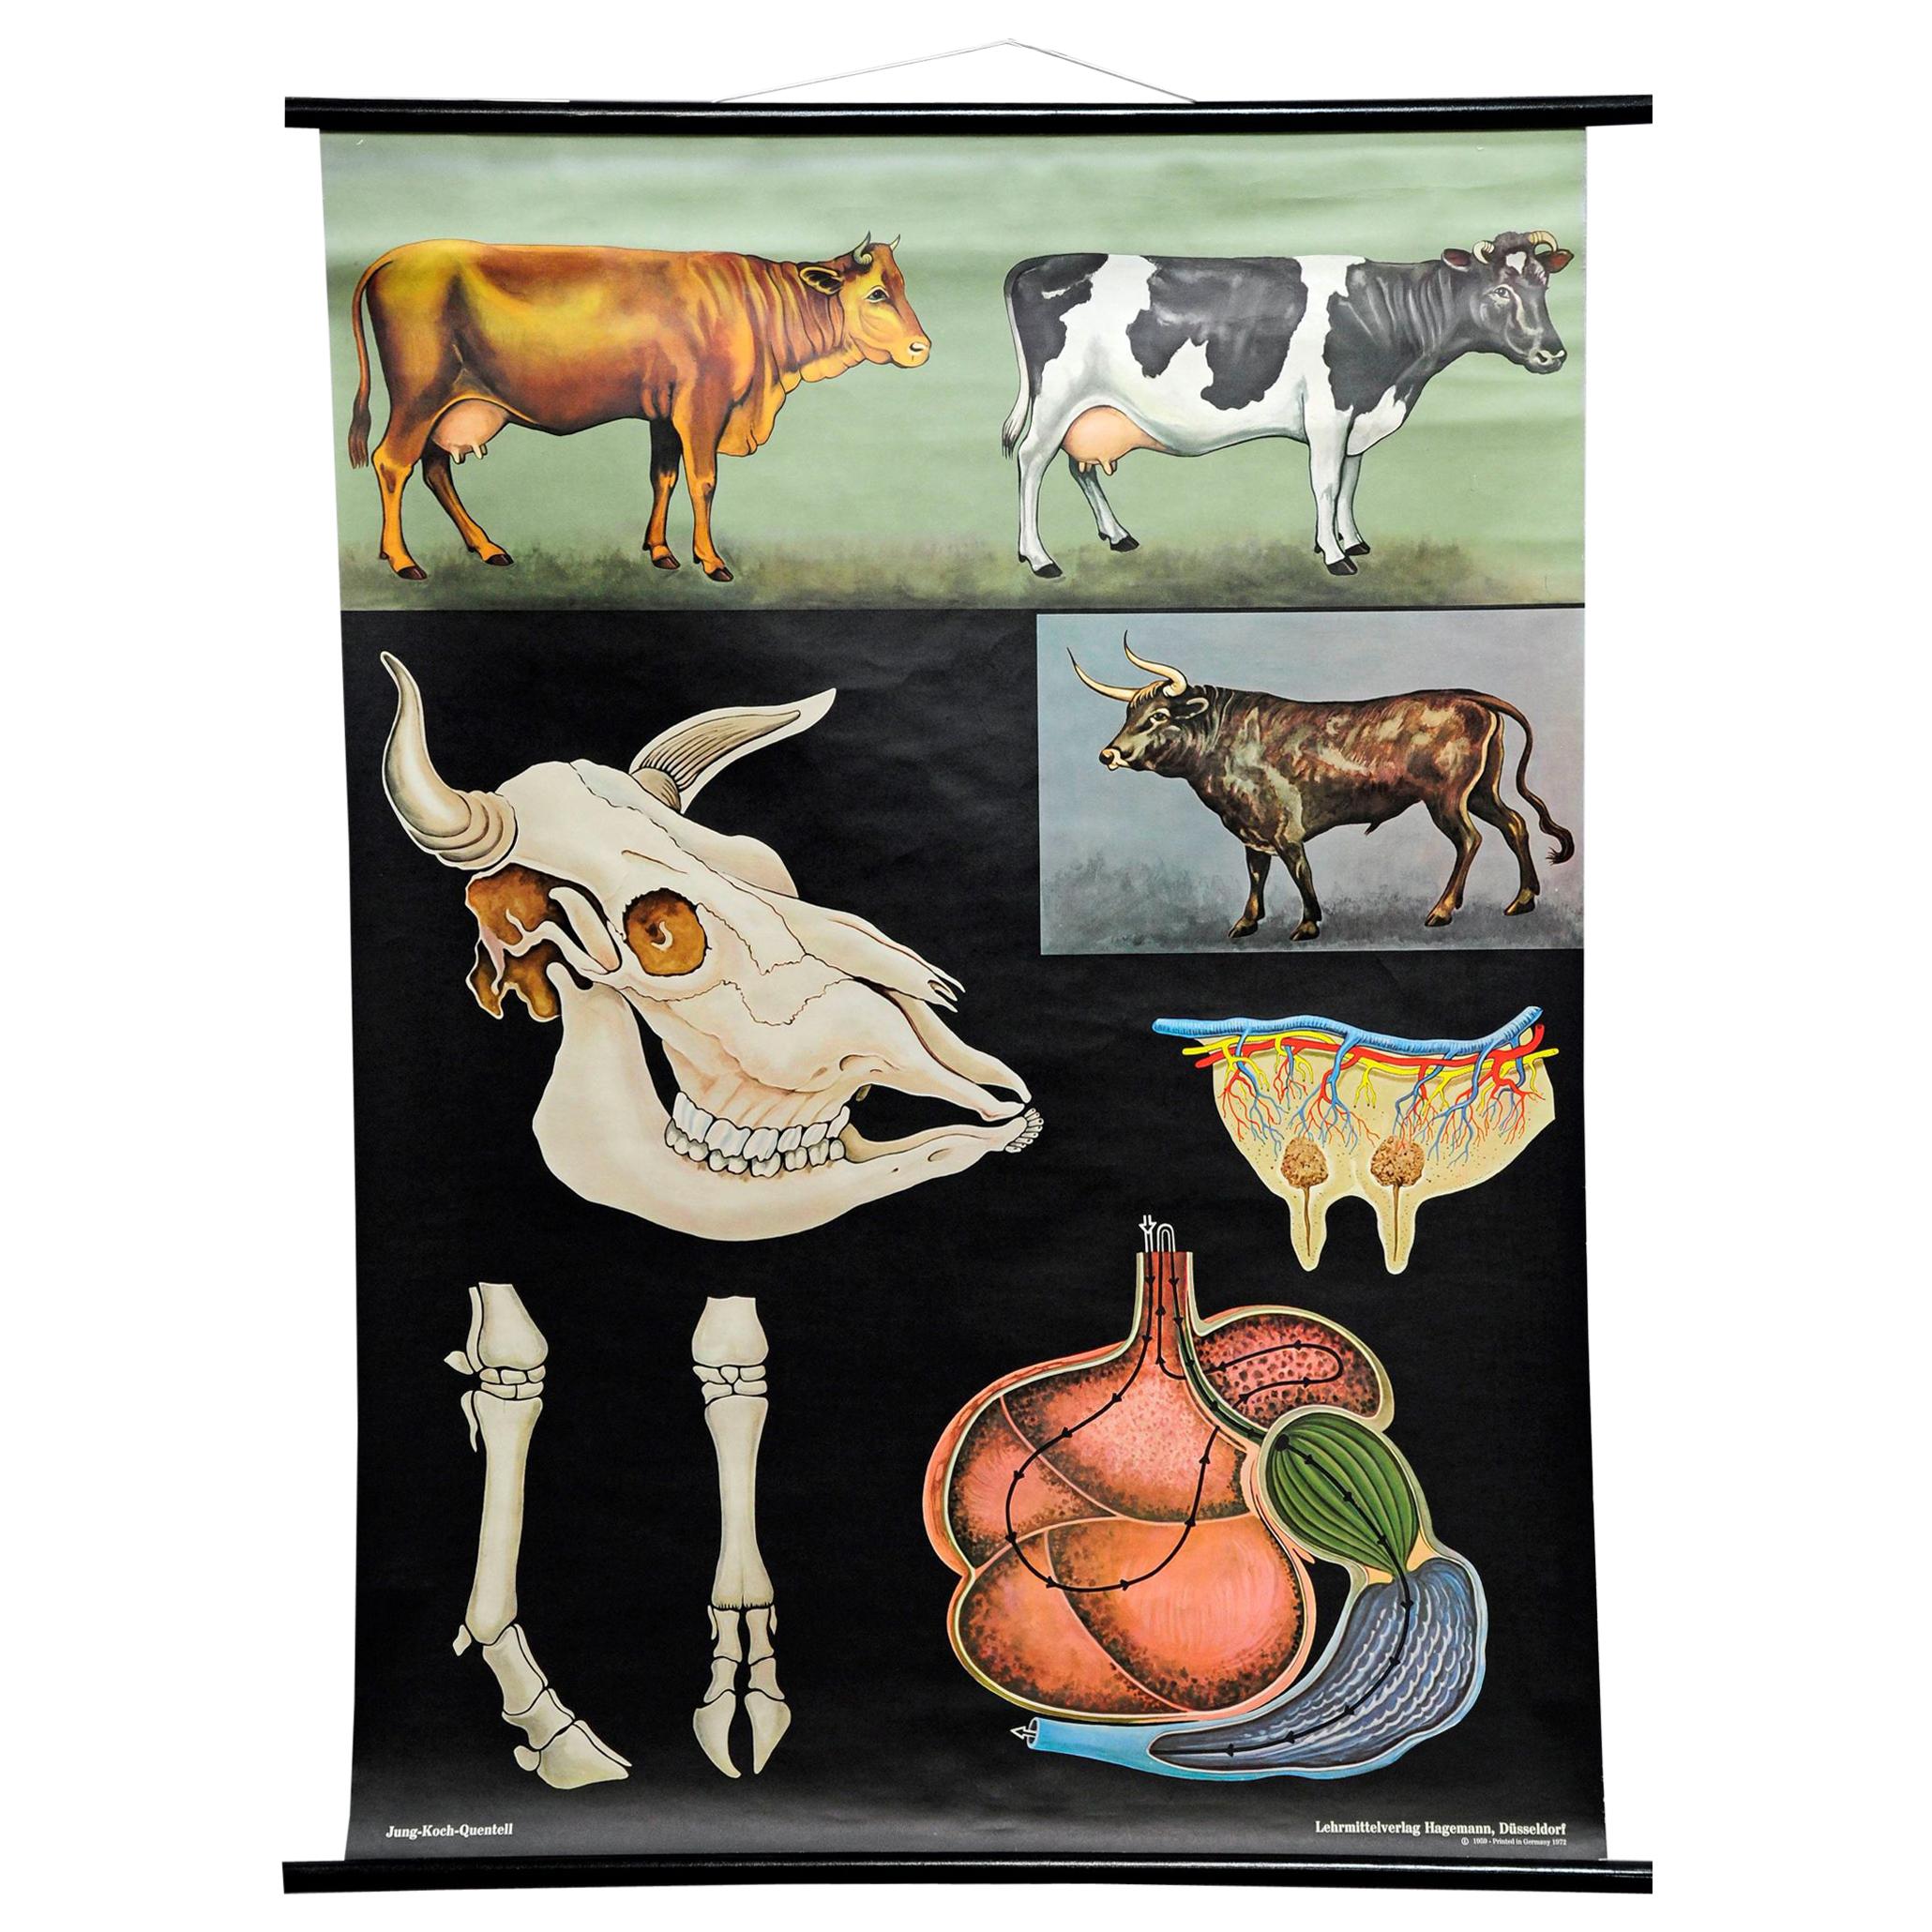 Cattle Cow Anatomy Jung Koch Quentell Art Print Vintage Mural Wall Chart Poster For Sale